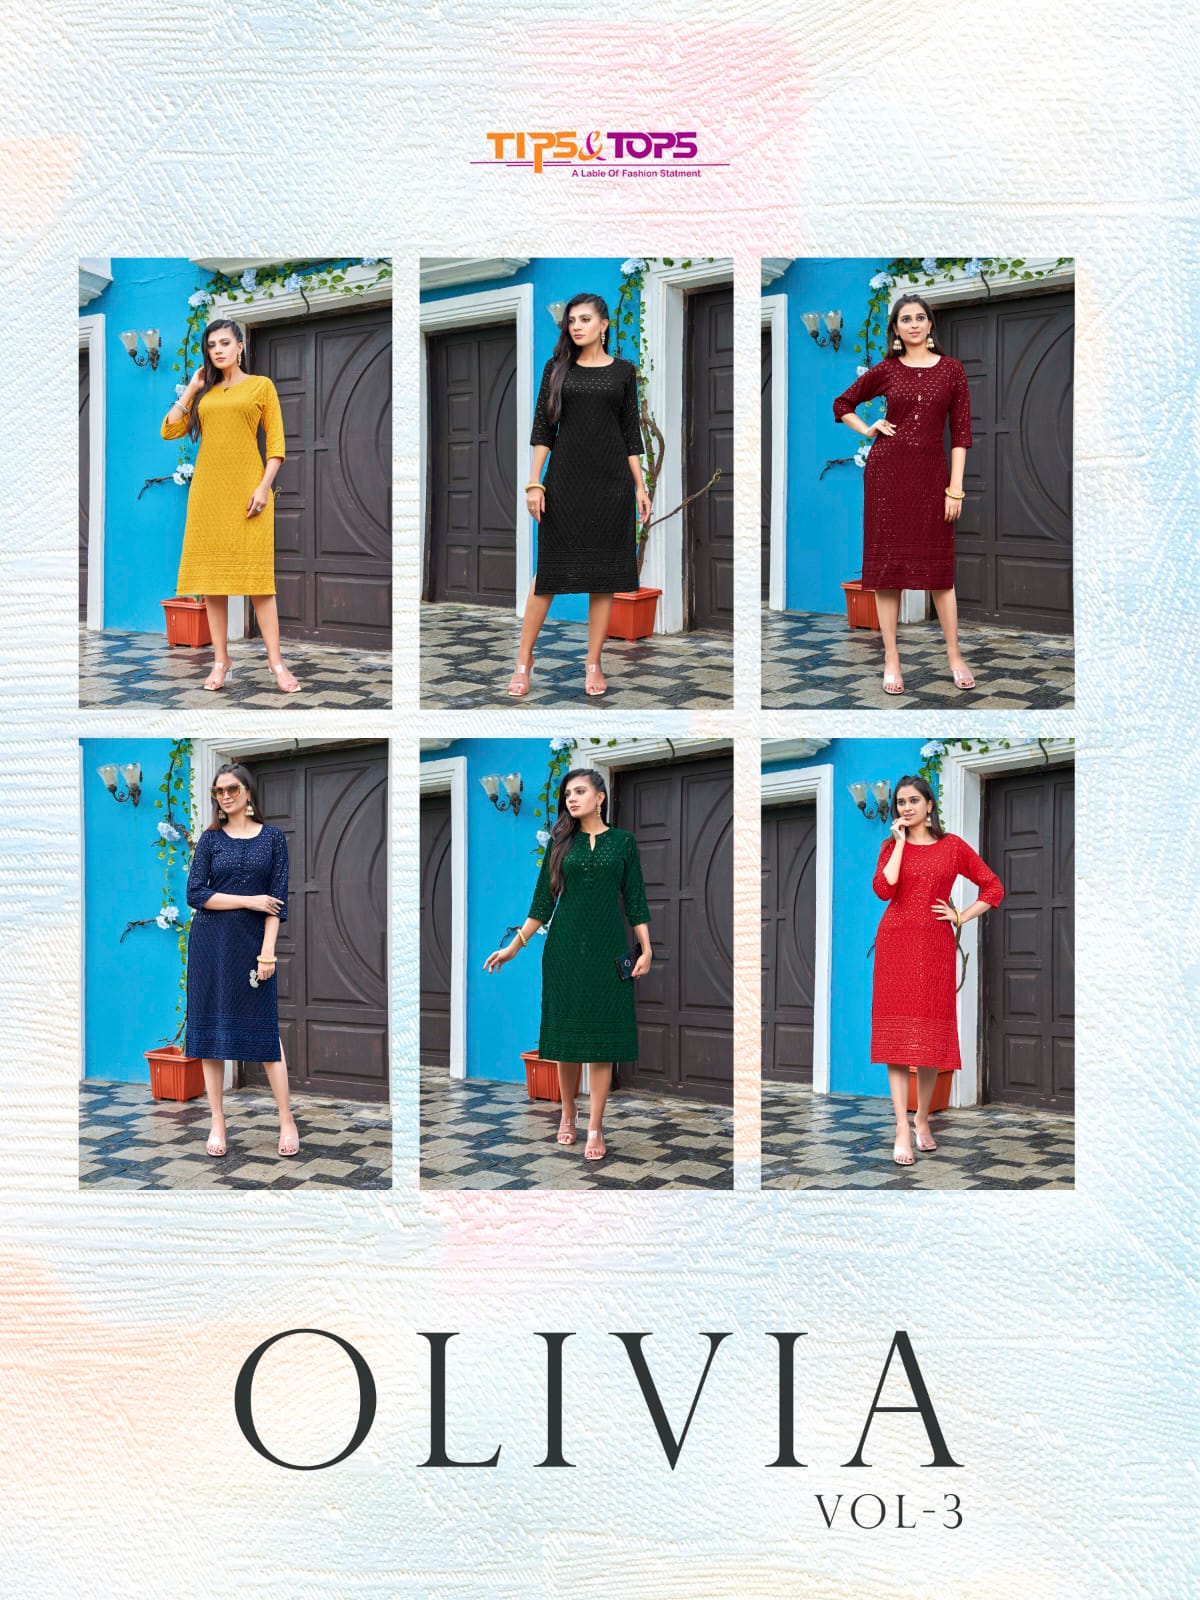 Tips And Tops Olivia Vol 3 collection 2